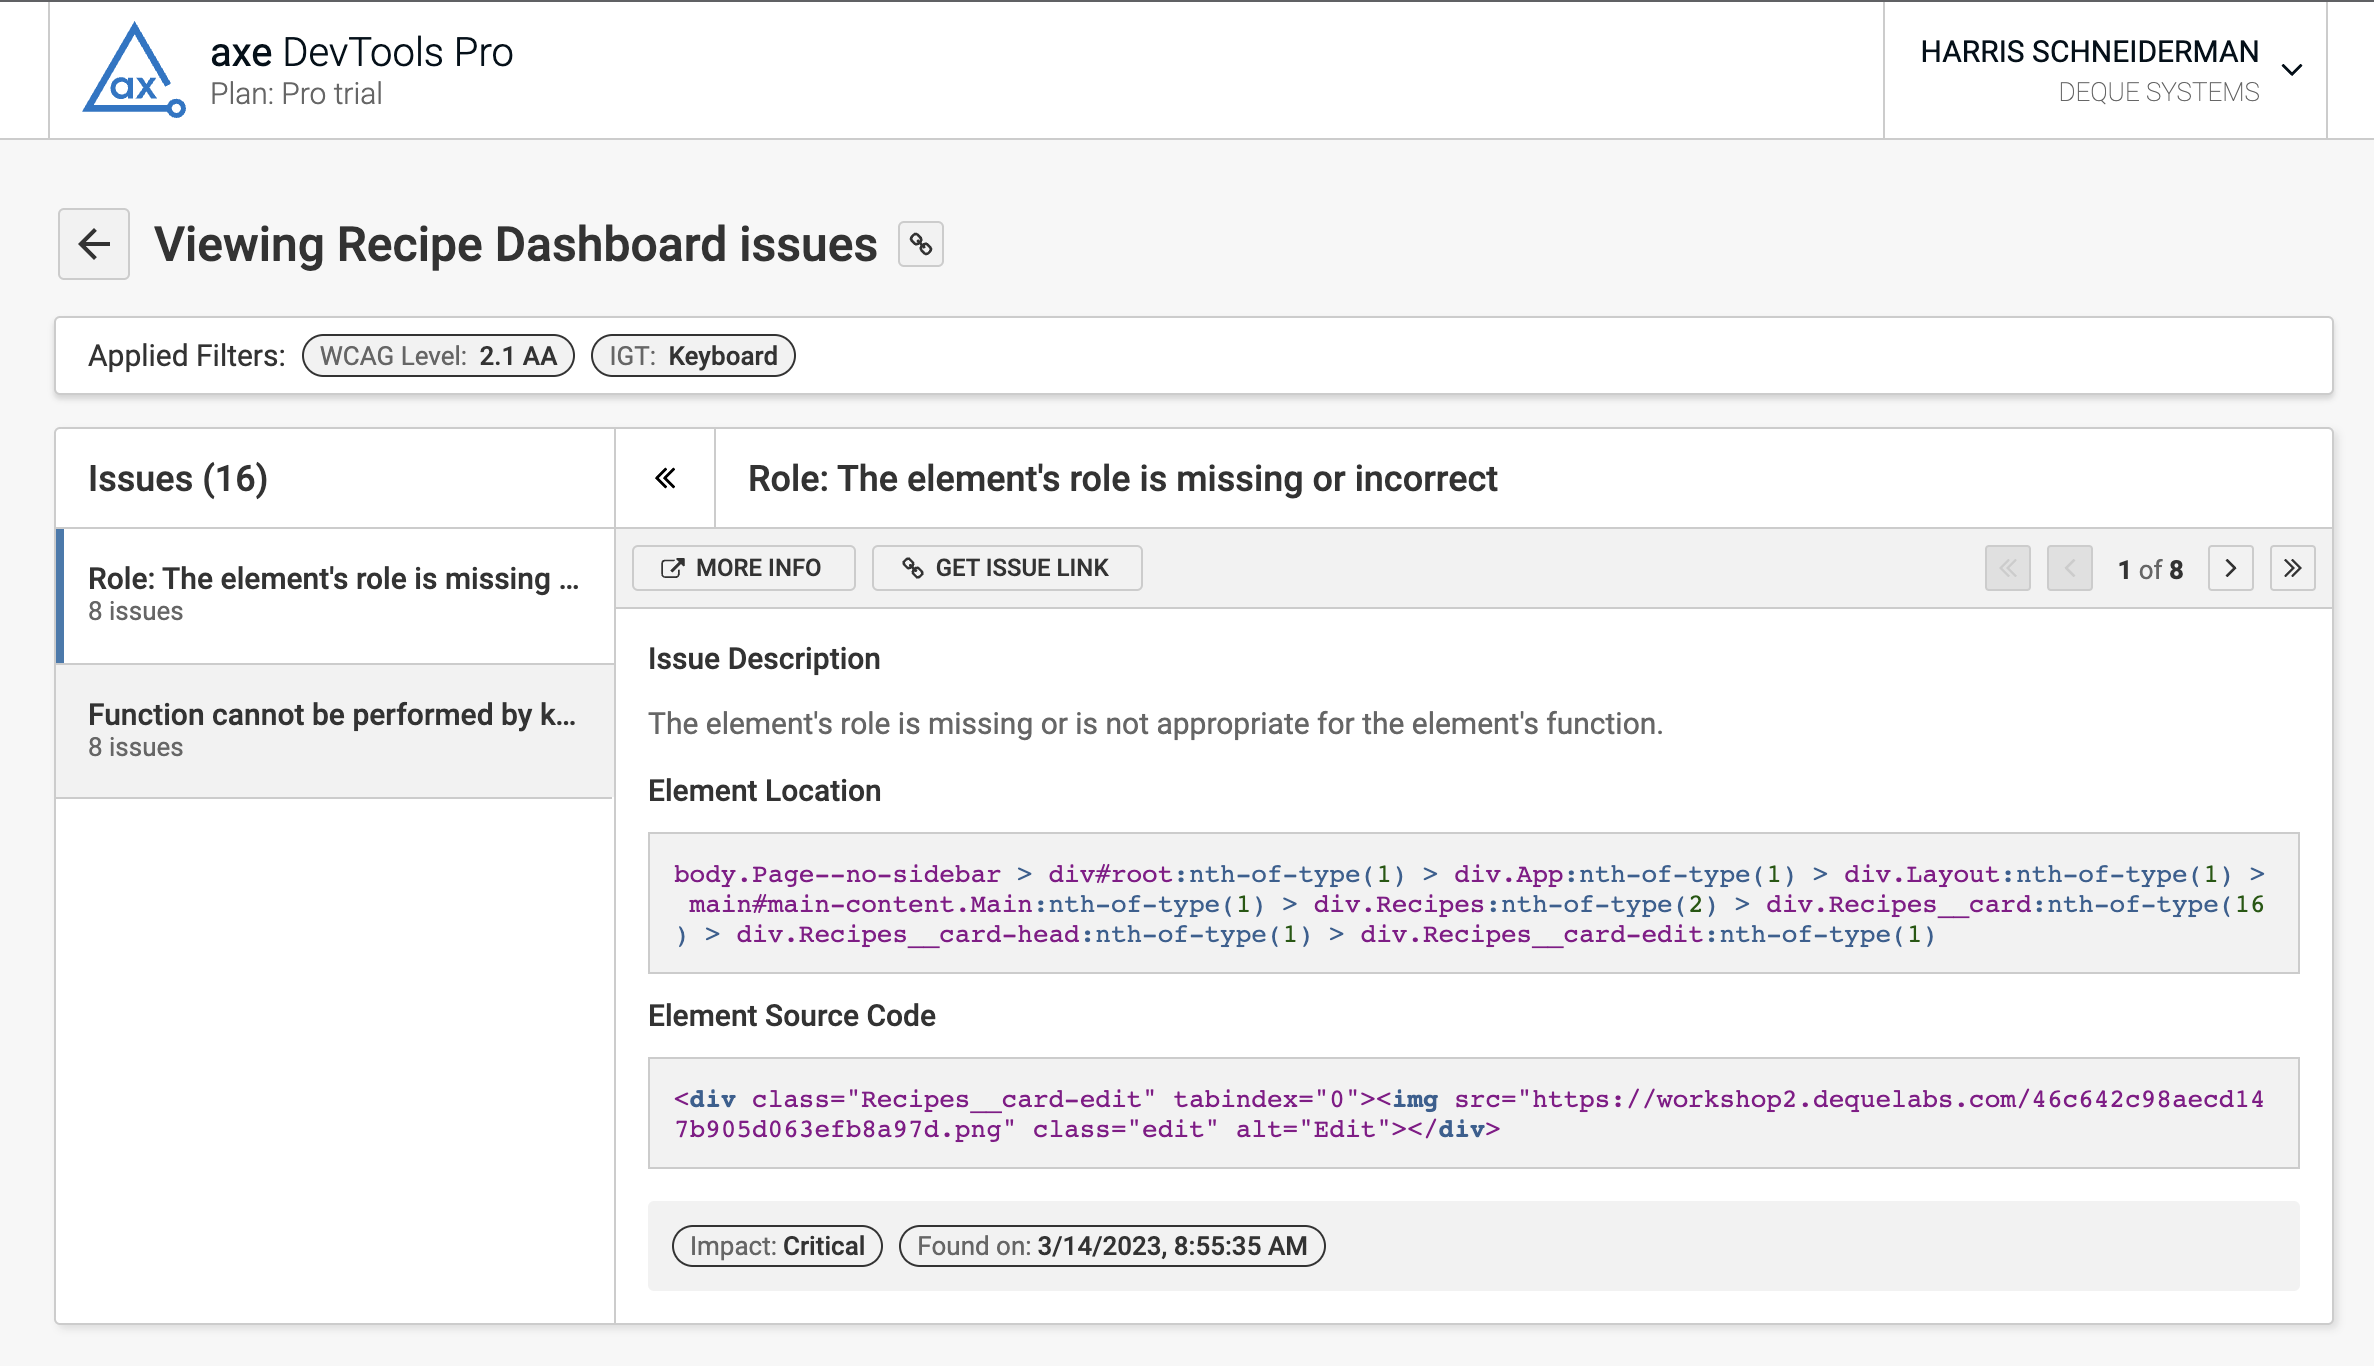 Screenshot of the "issues view" from the share test record page that includes a description, location, source code and more on different accessibility issues.